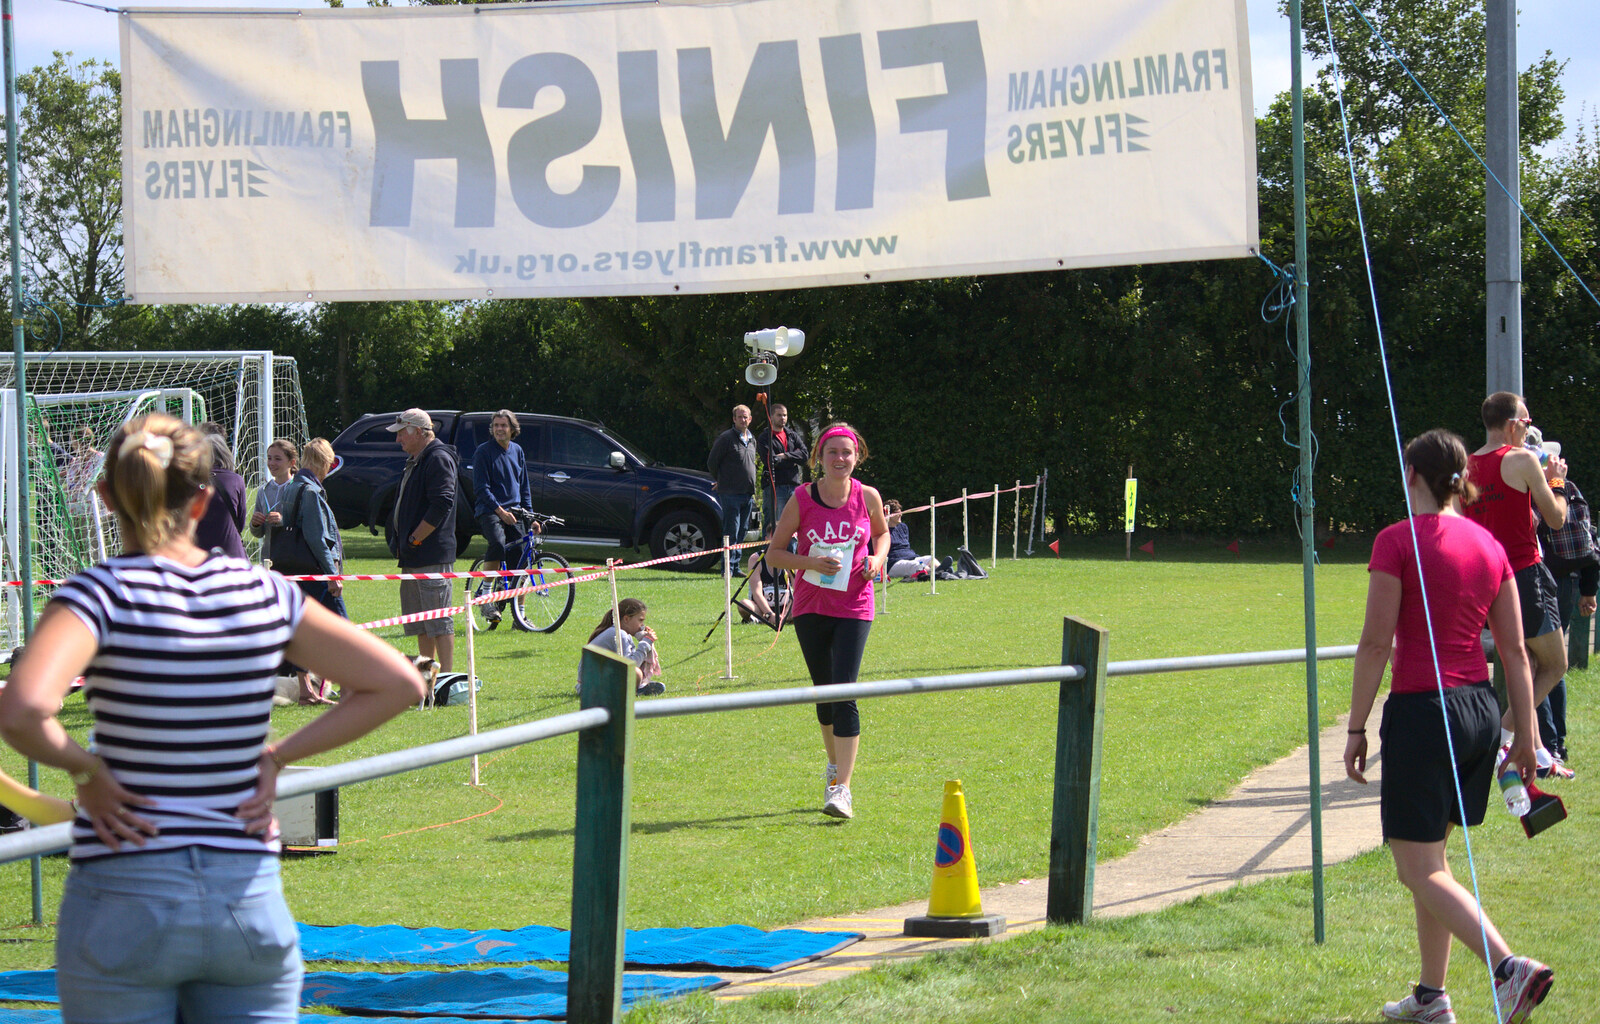 Isobel comes in to the finish line from The Framlingham 10k Run, Suffolk - 31st August 2014